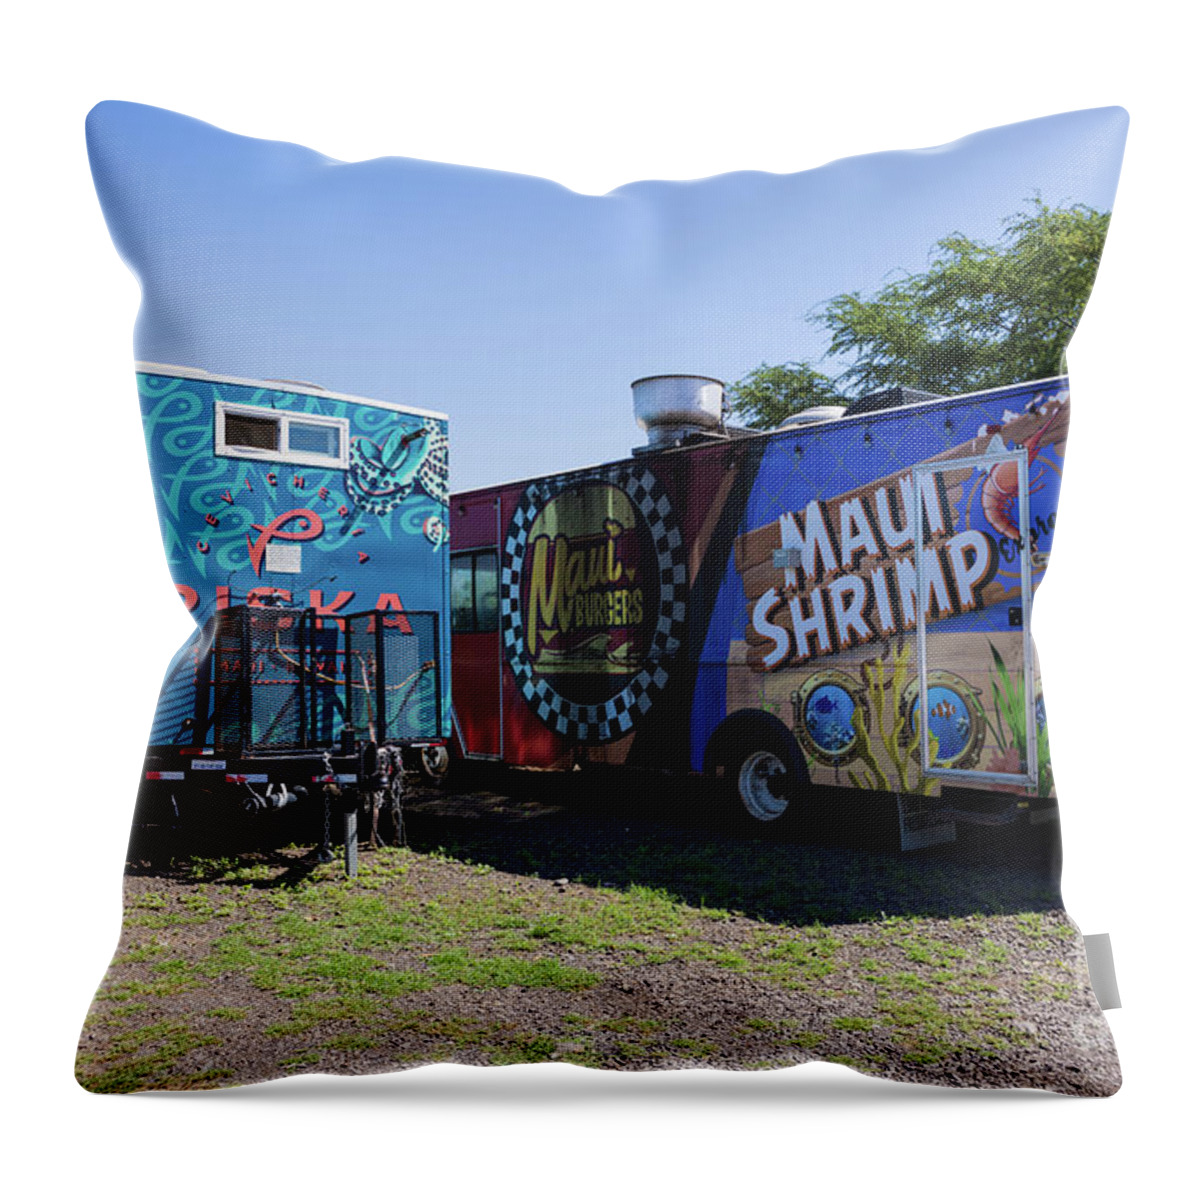 Food Trucks Throw Pillow featuring the photograph Food Trucks Maui by Eva Lechner